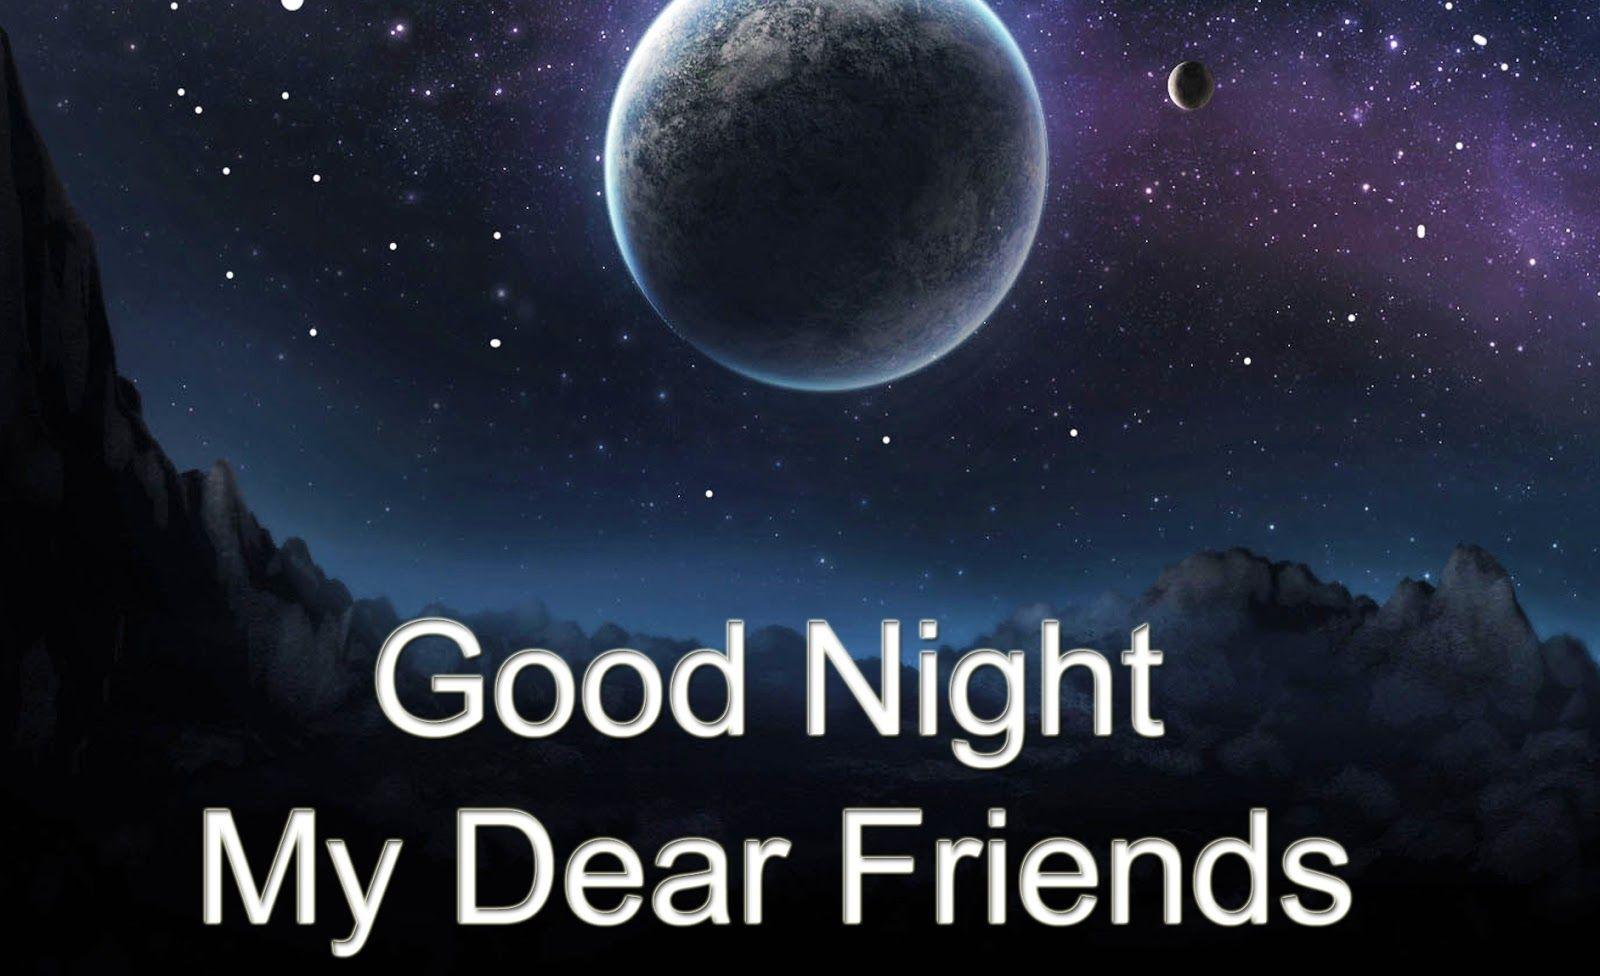 Best Good night HD Image, 3D Picture, Photo, Quotes, Wallpaper